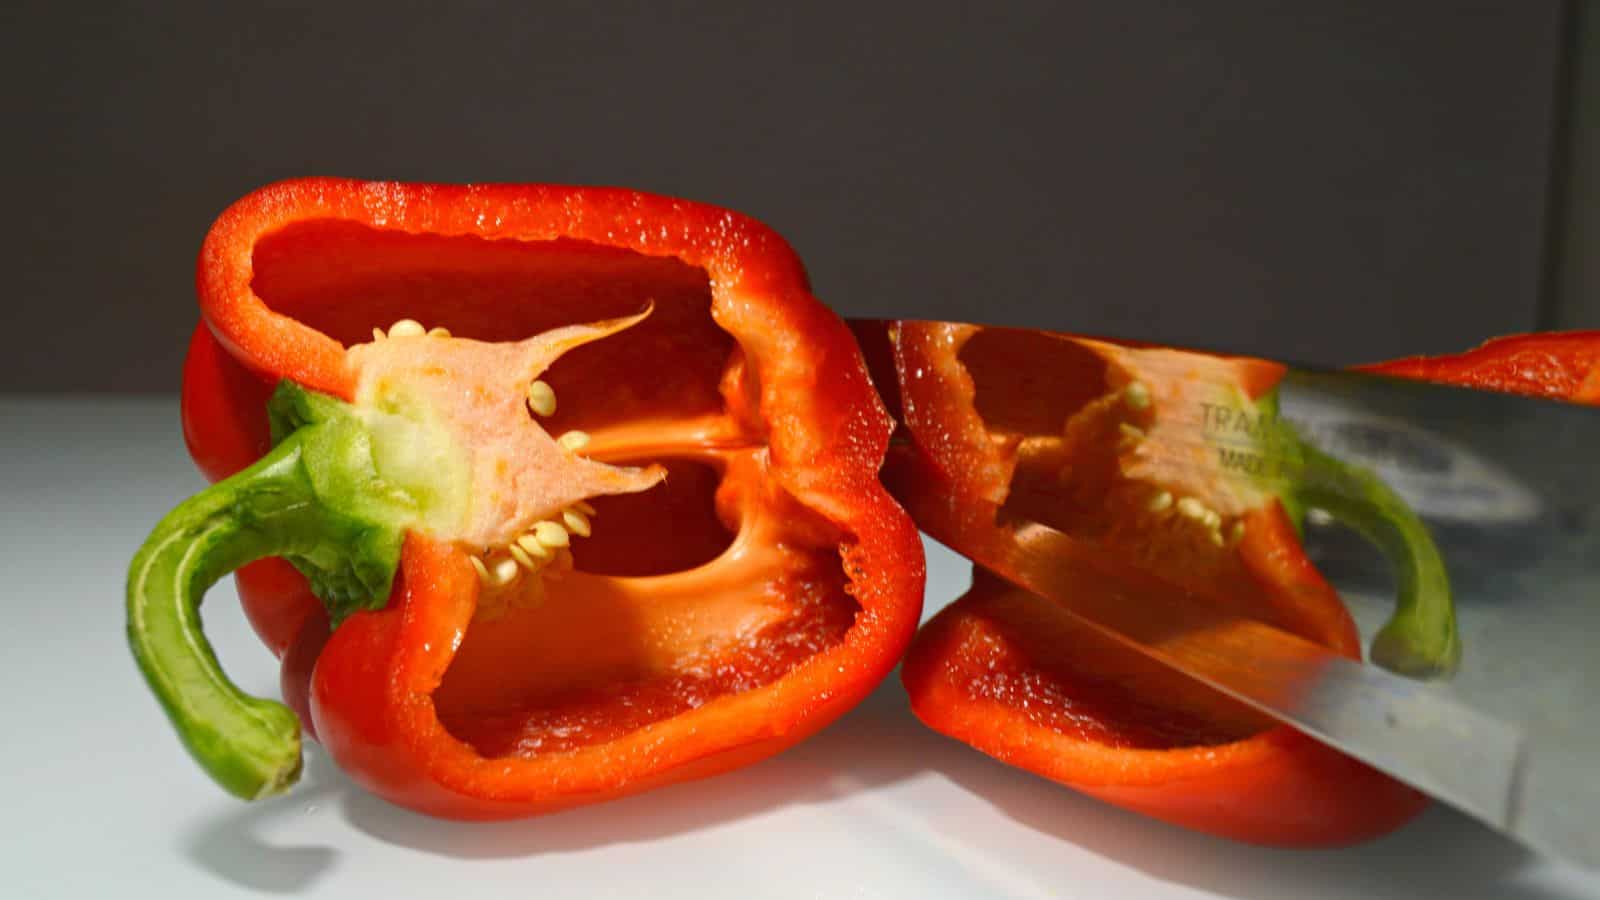 Red bell pepper cut in half with a knife.